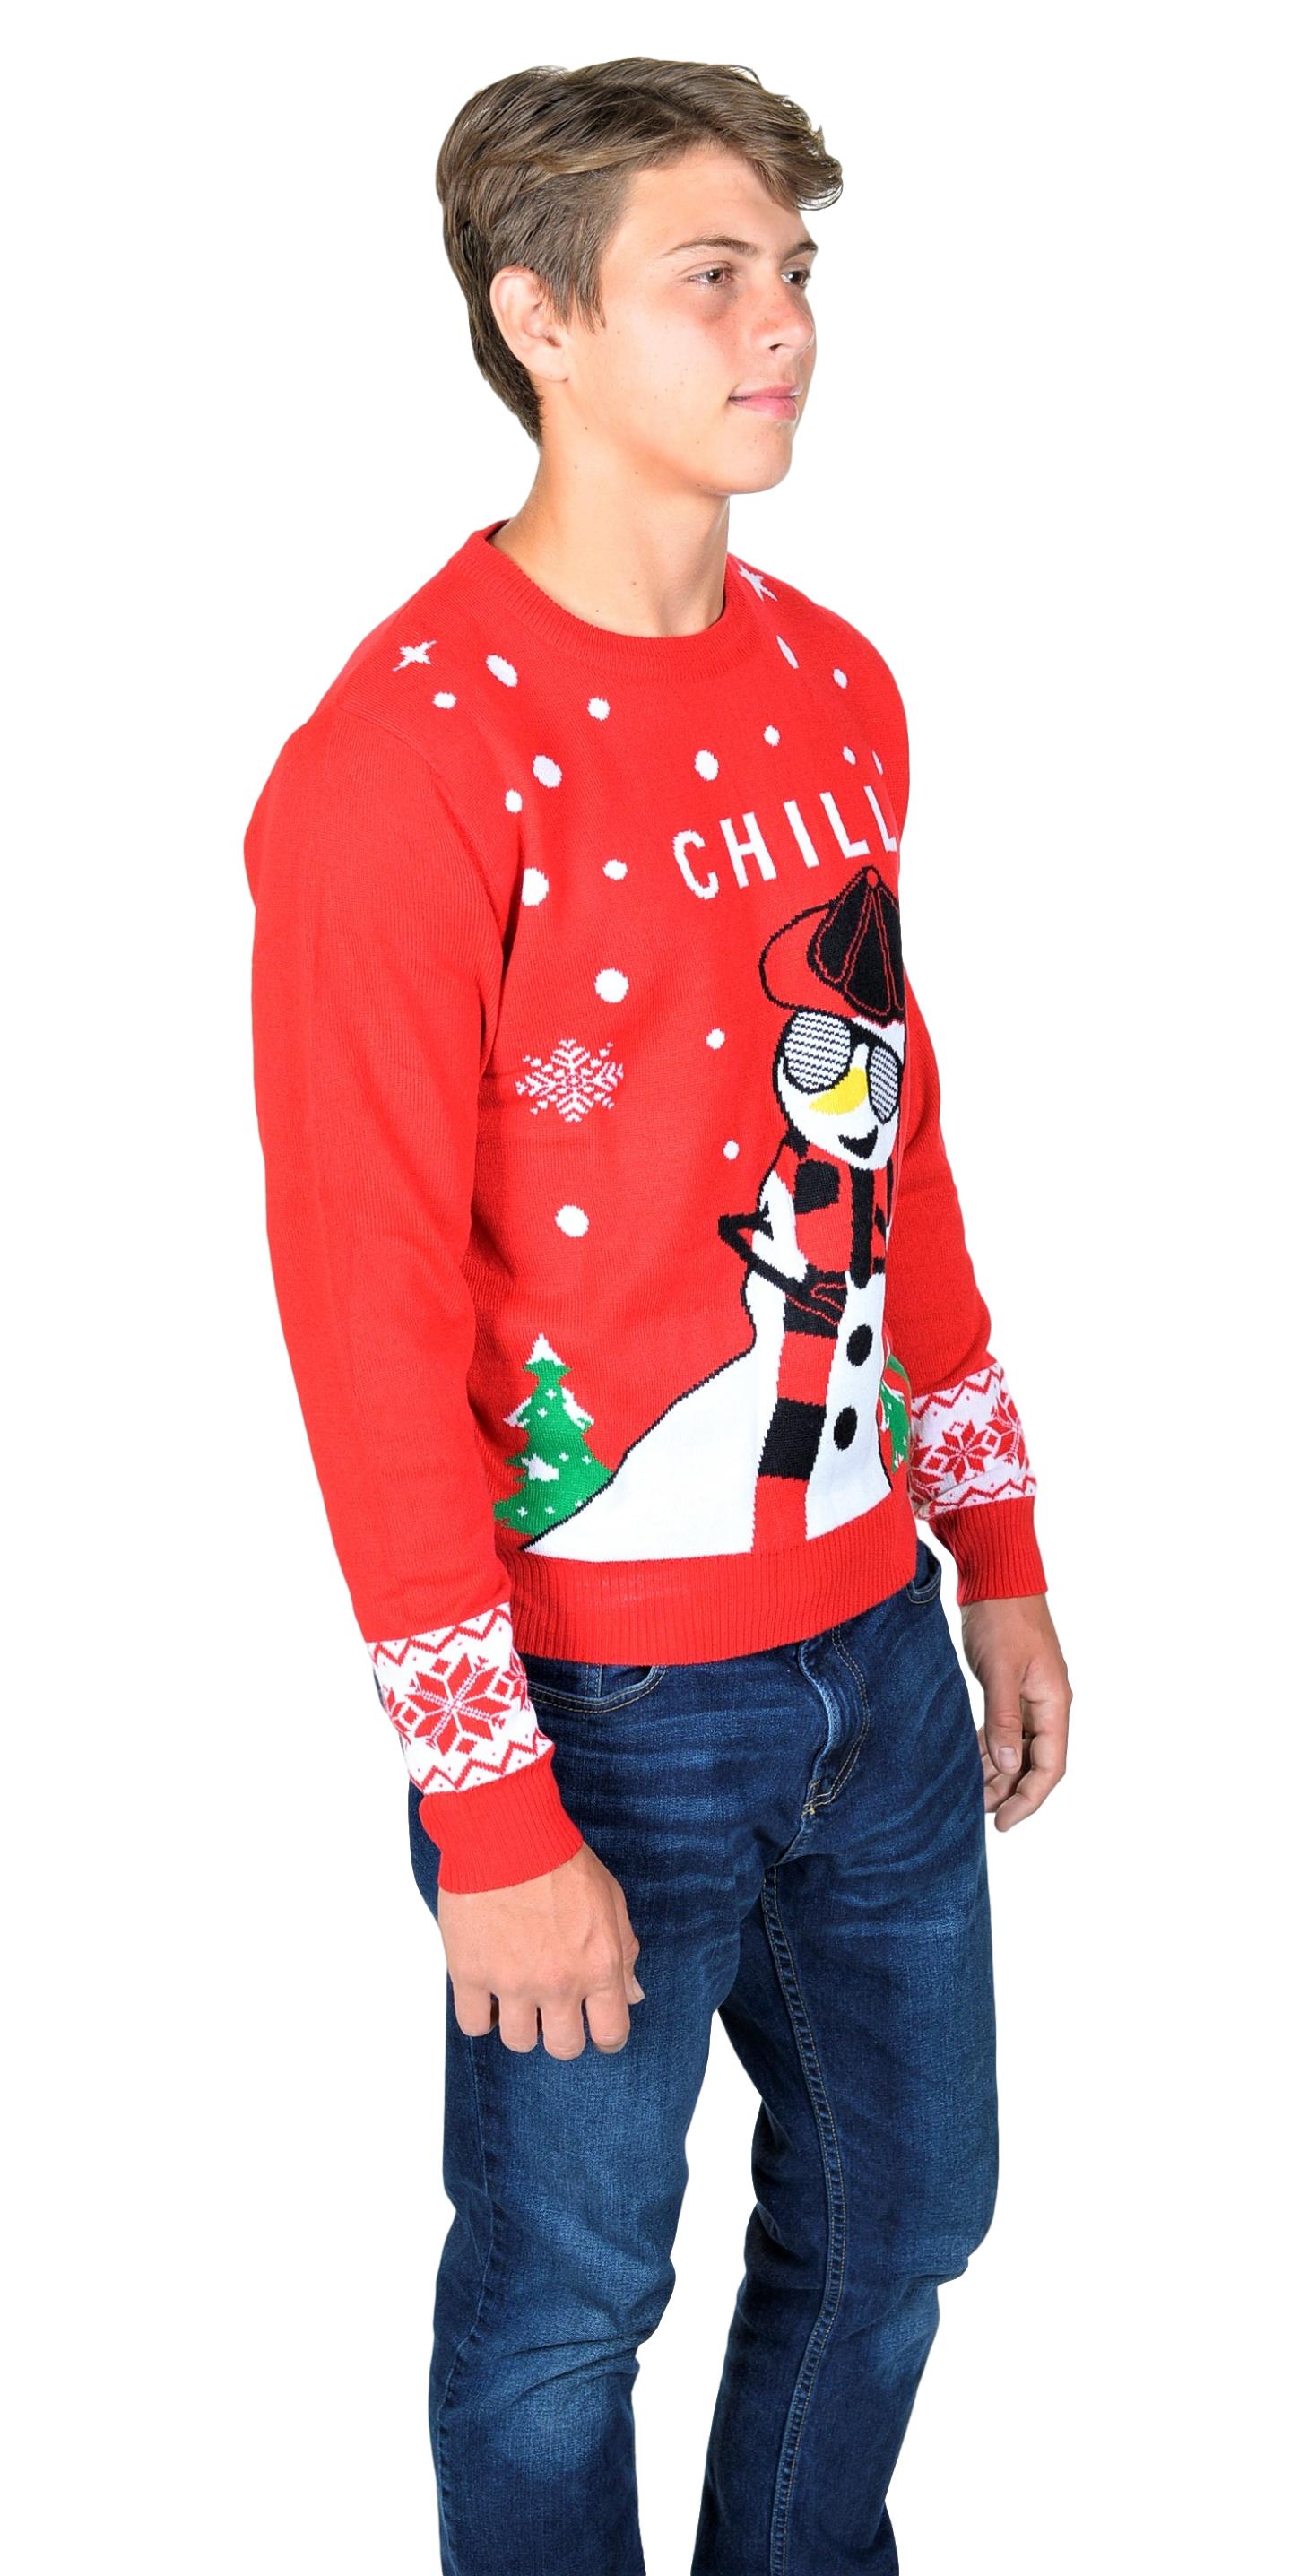 Chill Snowman Ugly Christmas Pullover Sweater